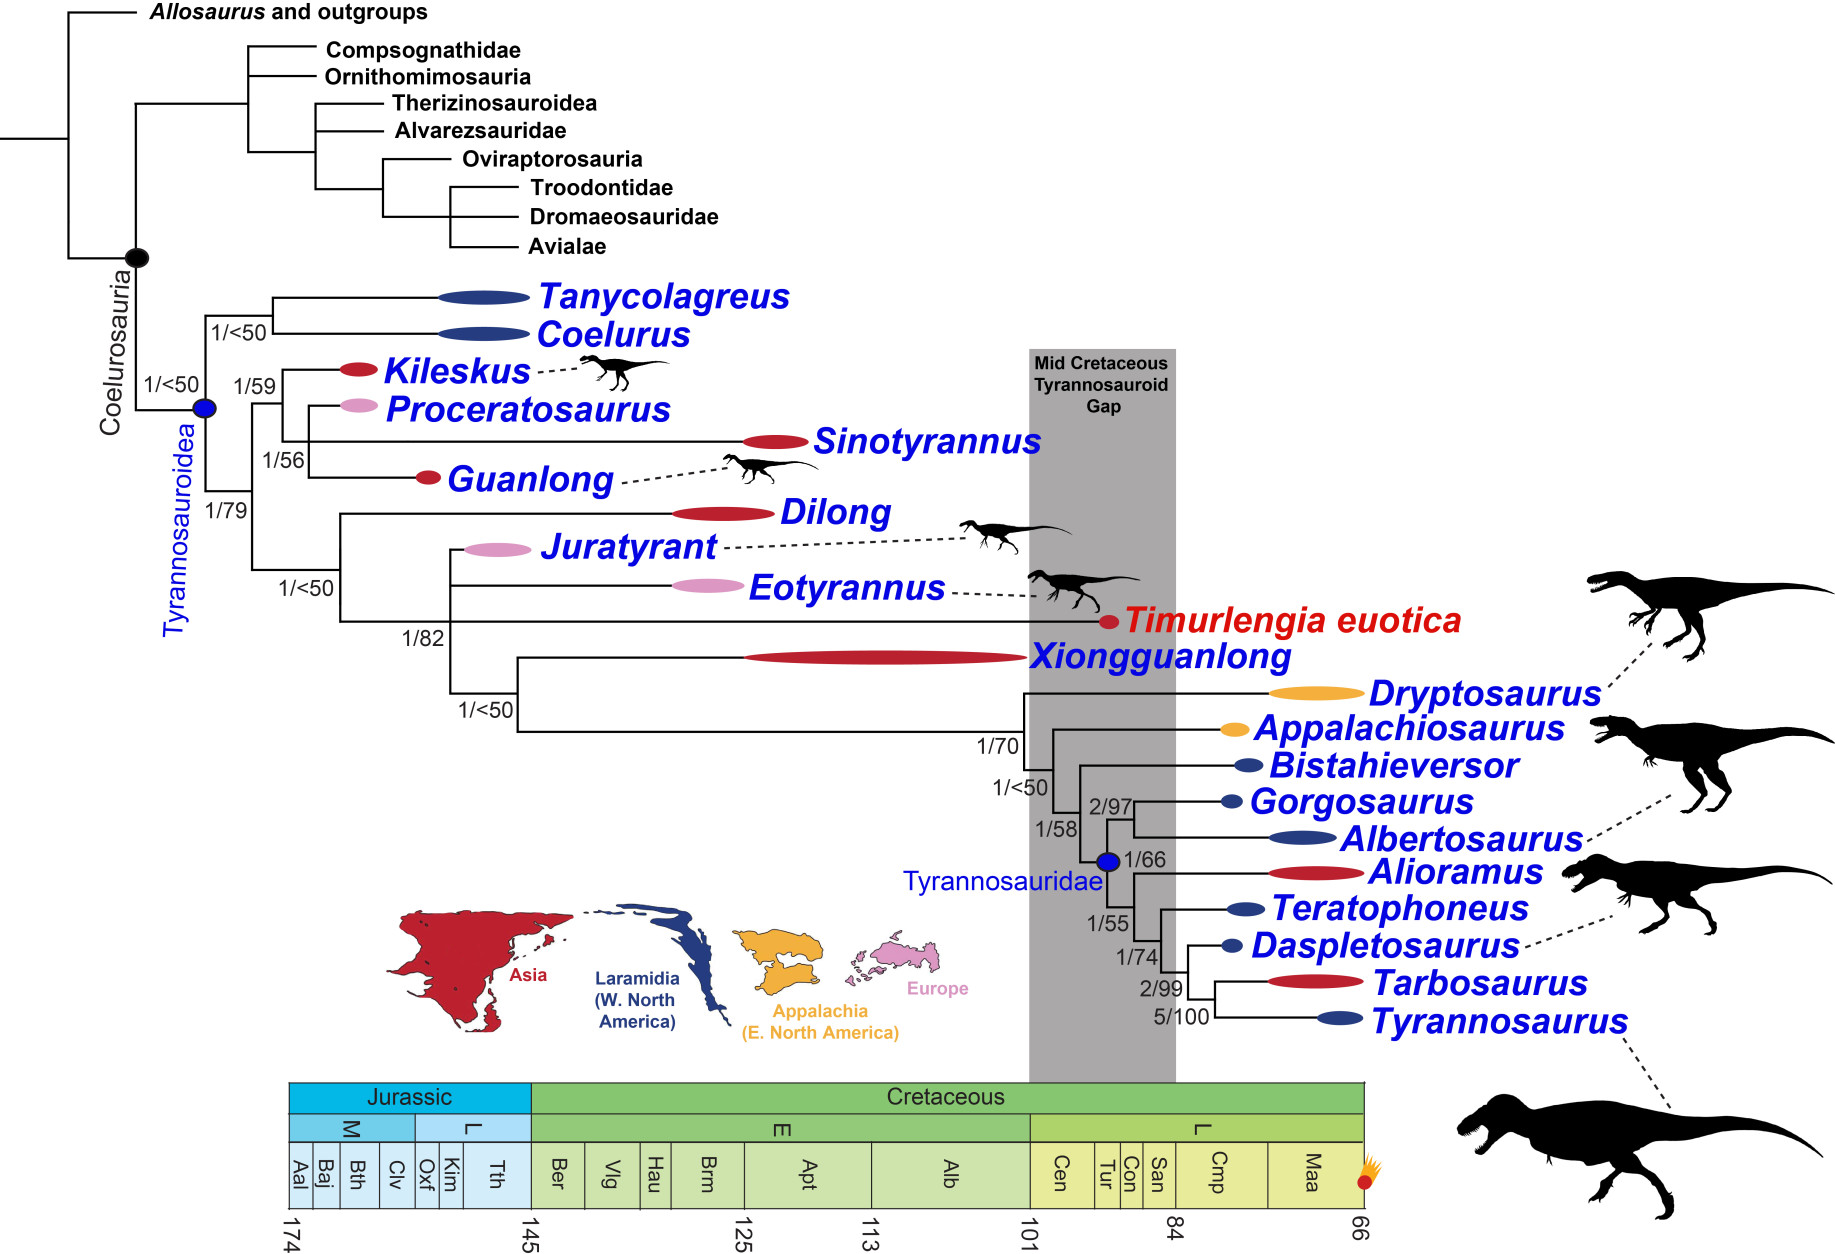 Family tree showing the interrelationships of most known species of tyrannosaurs. Geological stages and ages (in million years) at the bottom. The new tyrannosaur Timurlengia euotica is highlighted in red. (Courtesy Proceedings of the National Academy of Sciences)